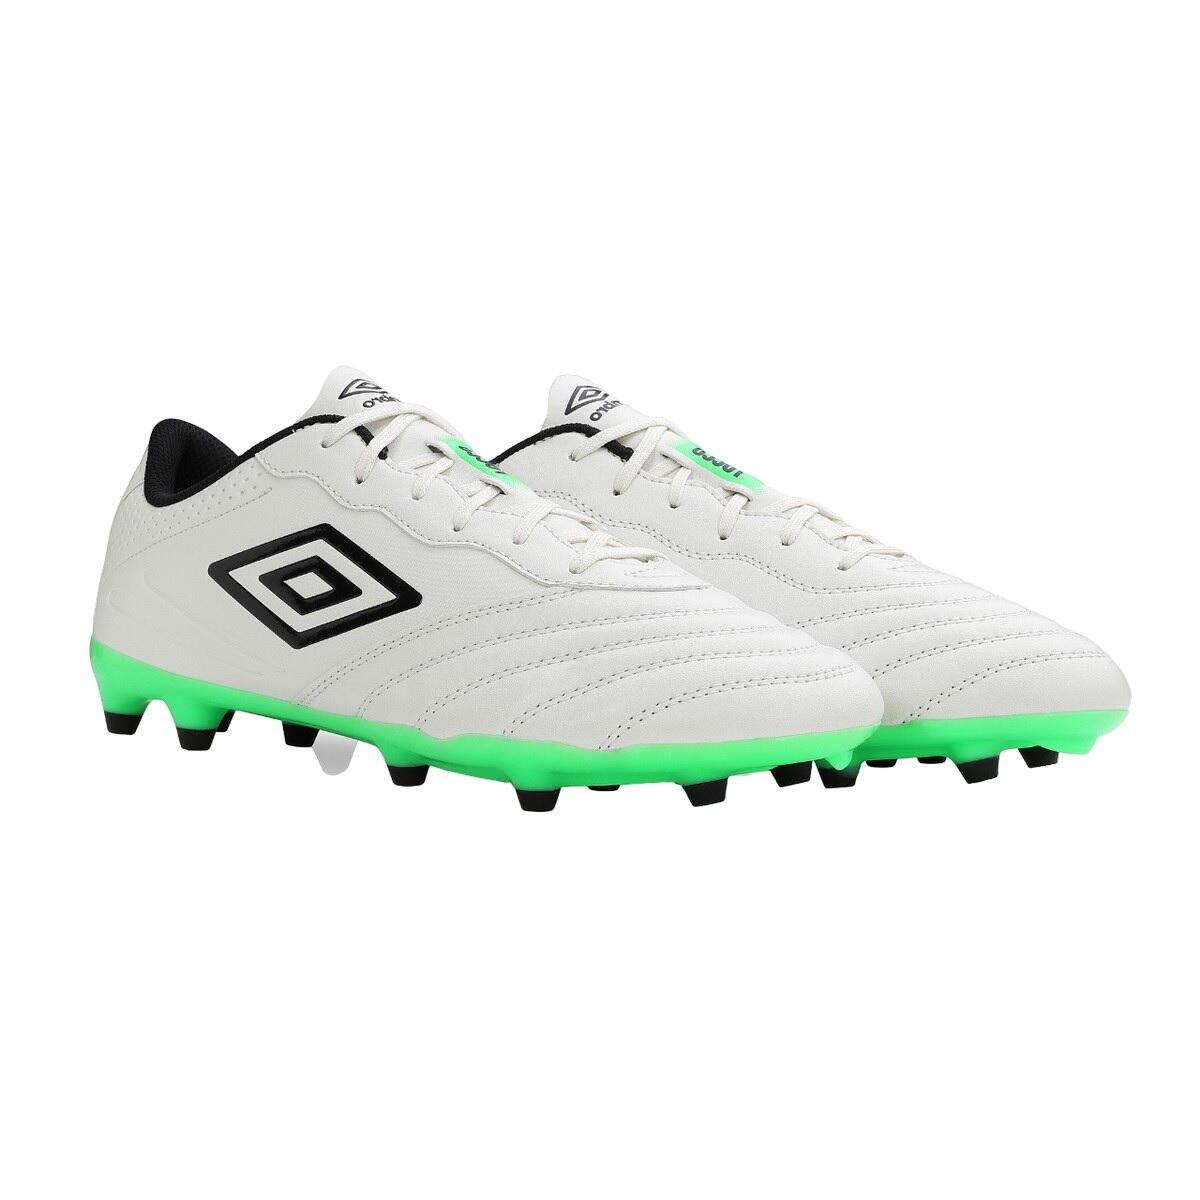 Mens Tocco III Club Leather Football Boots (White/Black/Andean Toucan) 1/4